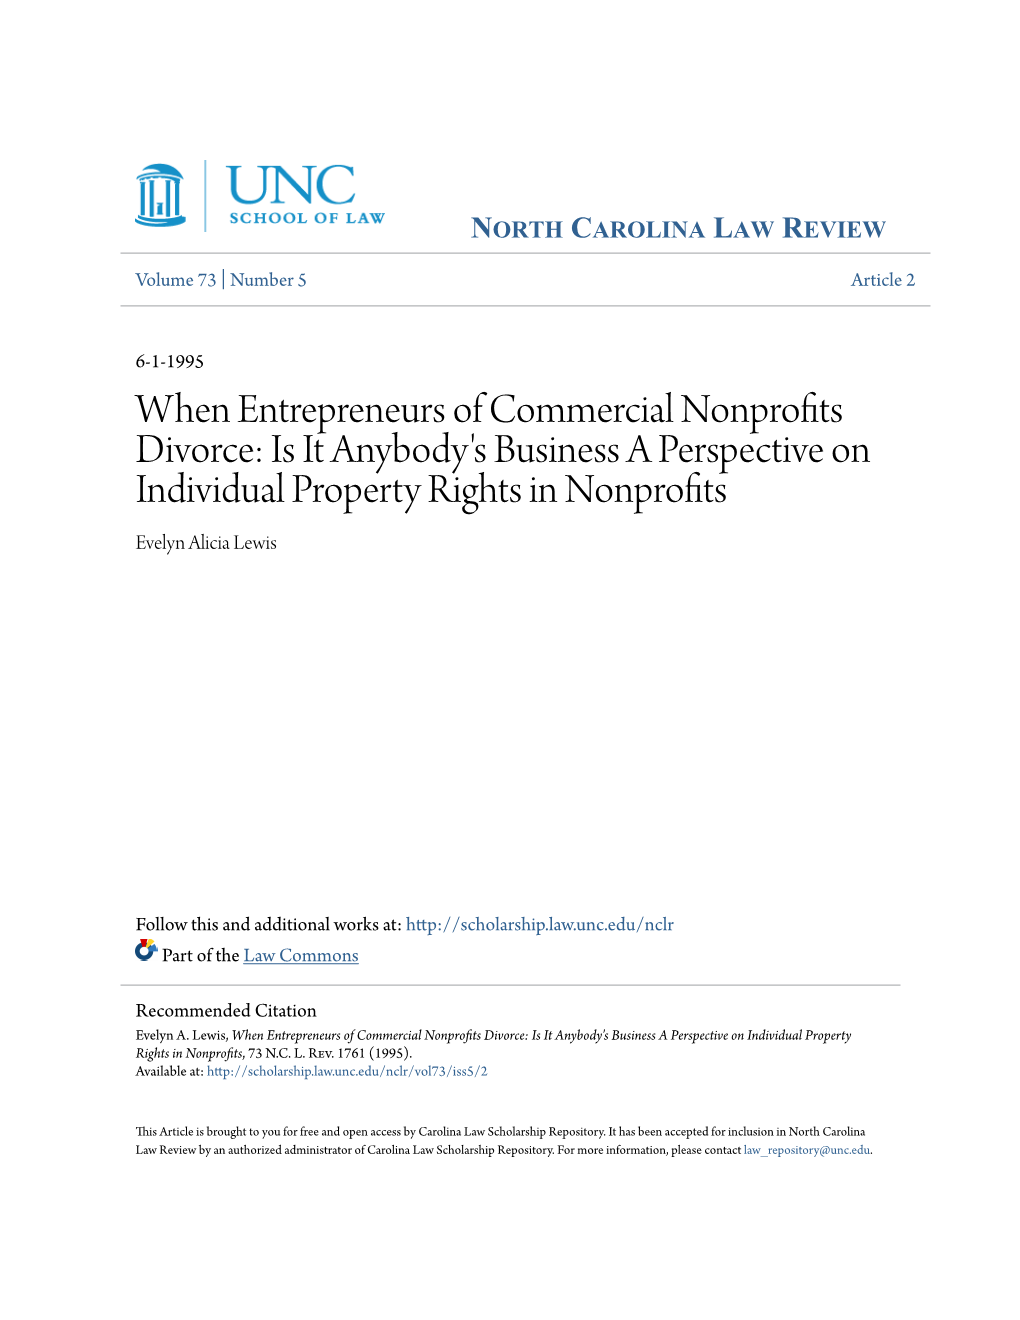 When Entrepreneurs of Commercial Nonprofits Divorce: Is It Anybody's Business a Perspective on Individual Property Rights in Nonprofits Evelyn Alicia Lewis